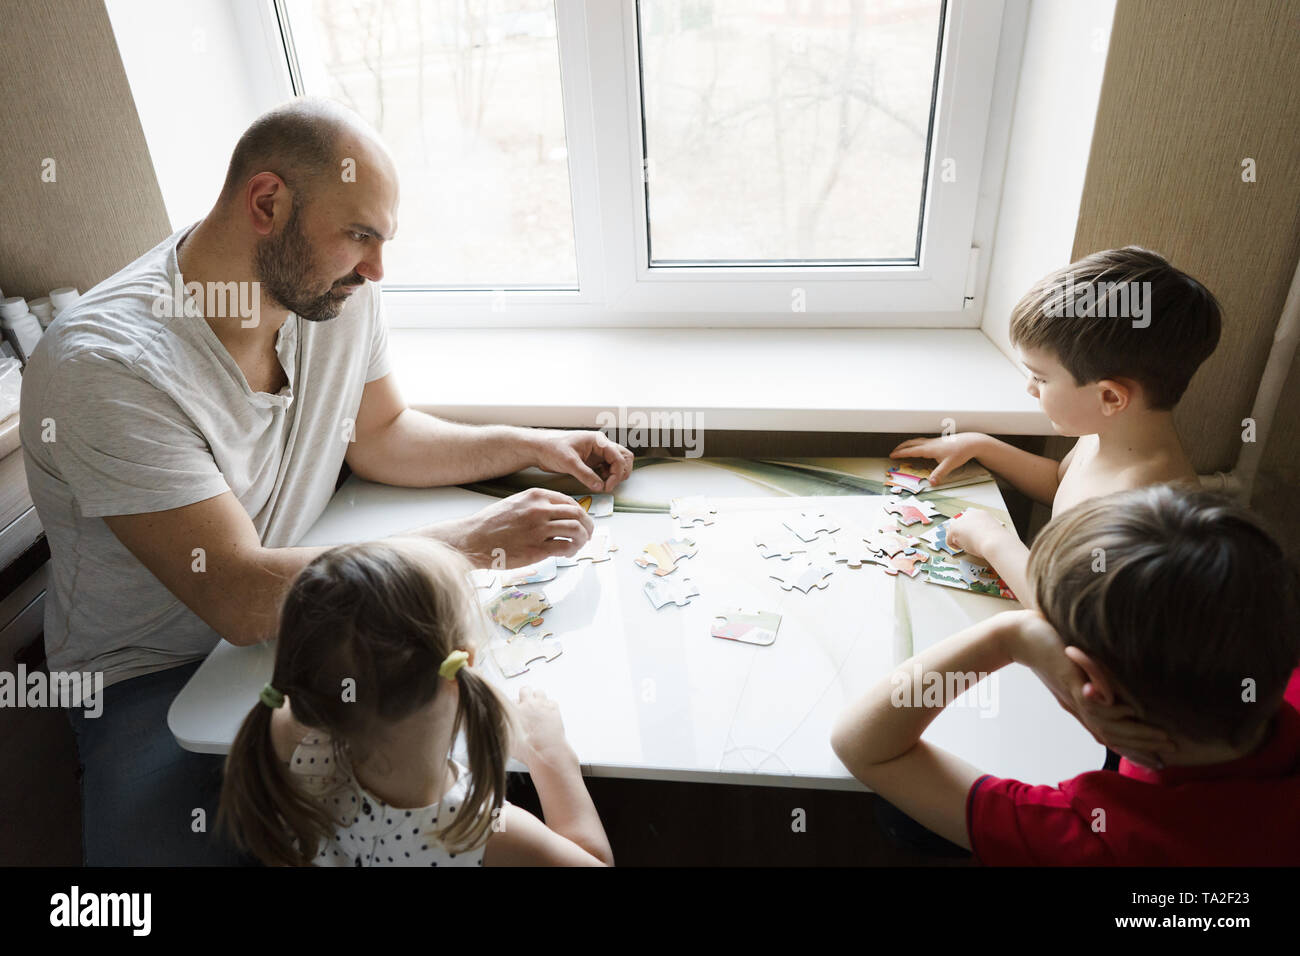 Family leisure: father, sons and daughter play board games together Stock Photo